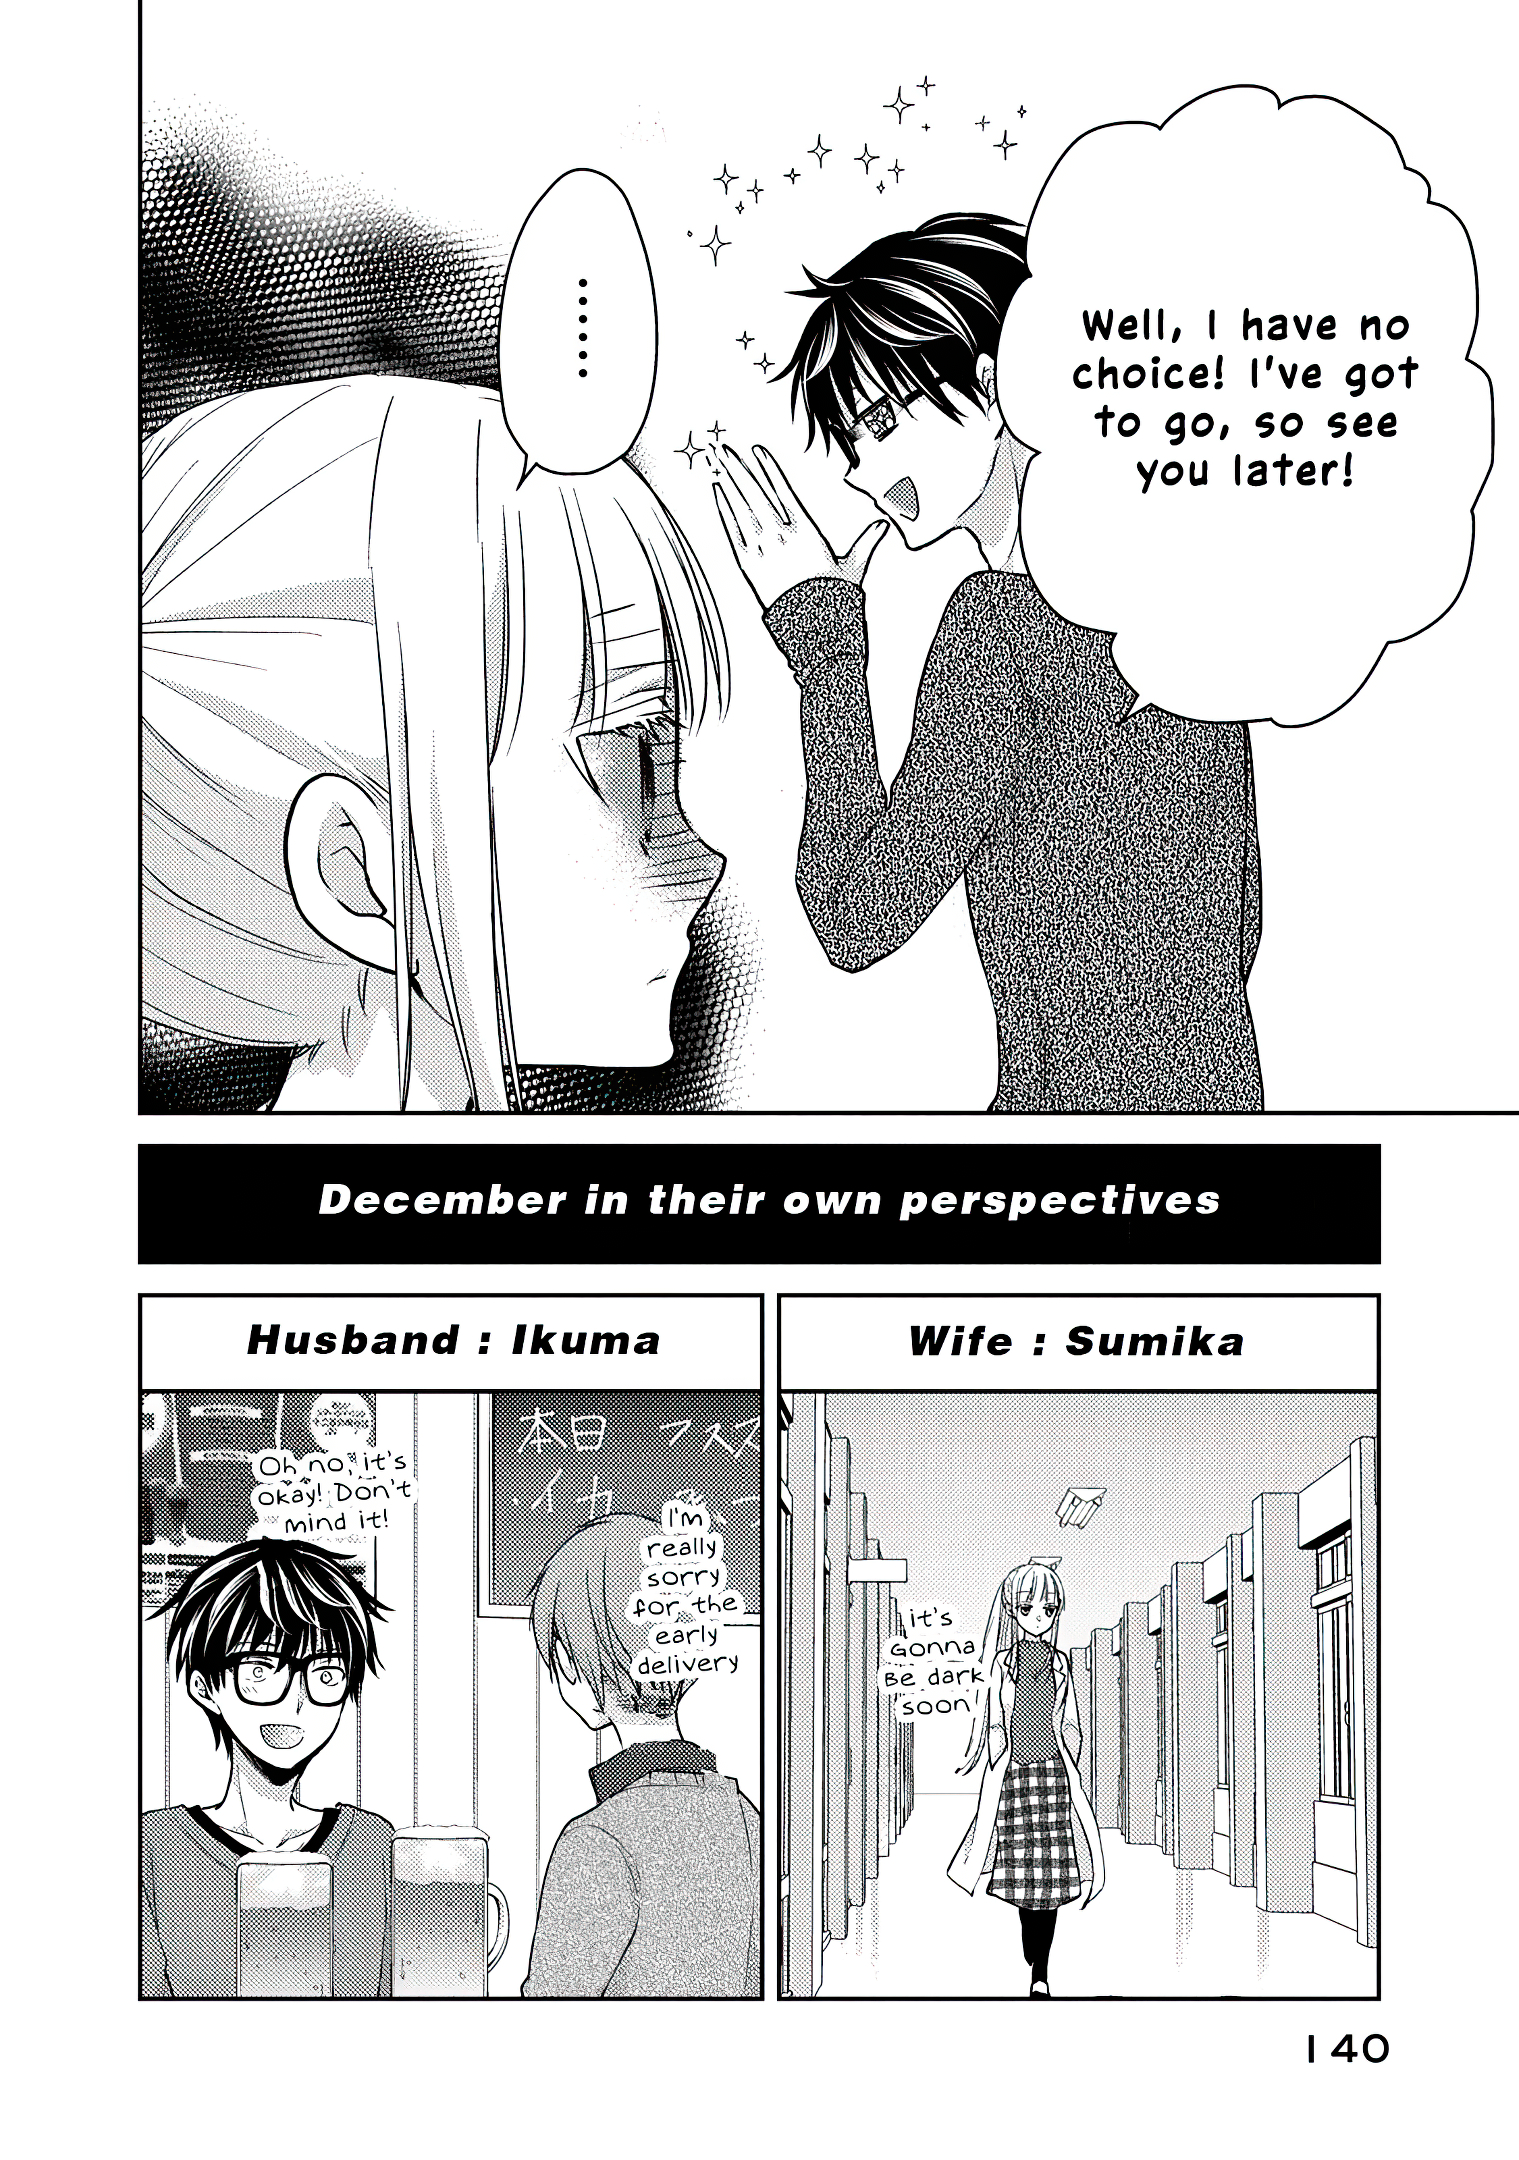 We May Be An Inexperienced Couple But... - Page 3